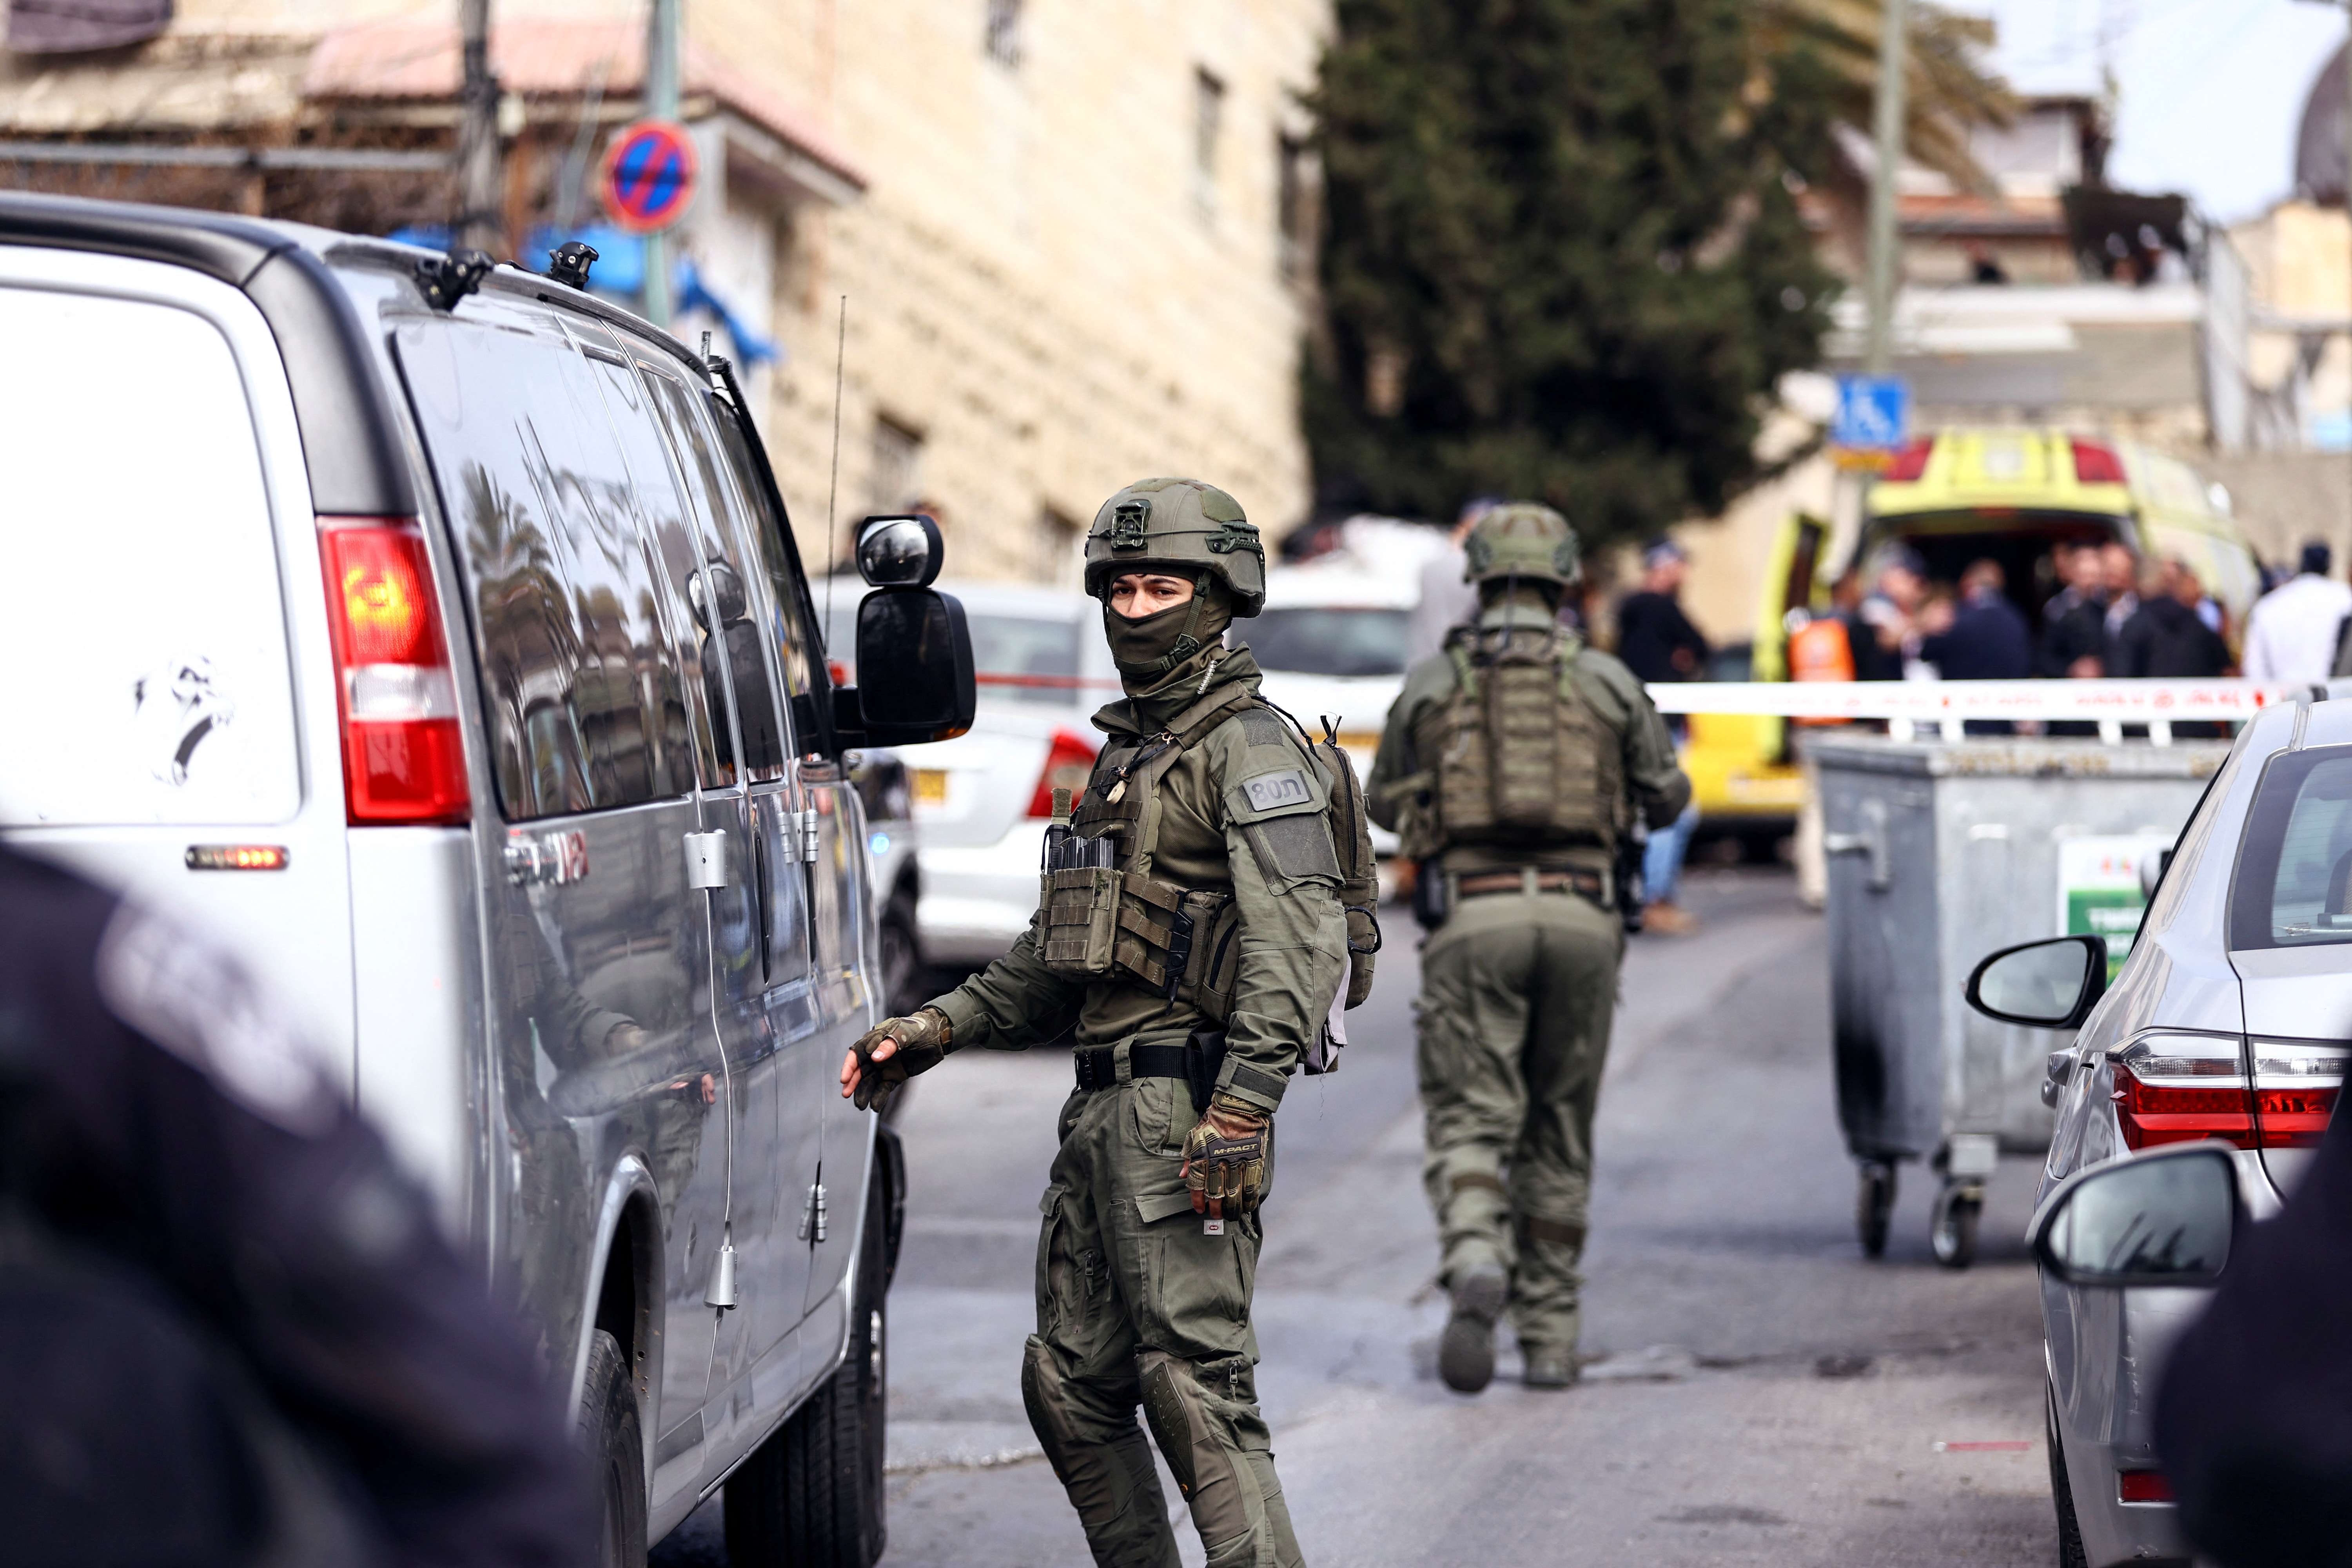 Israeli security personnel work near a scene where a suspected incident of shooting attack took place, police spokesman said, just outside Jerusalem's Old City